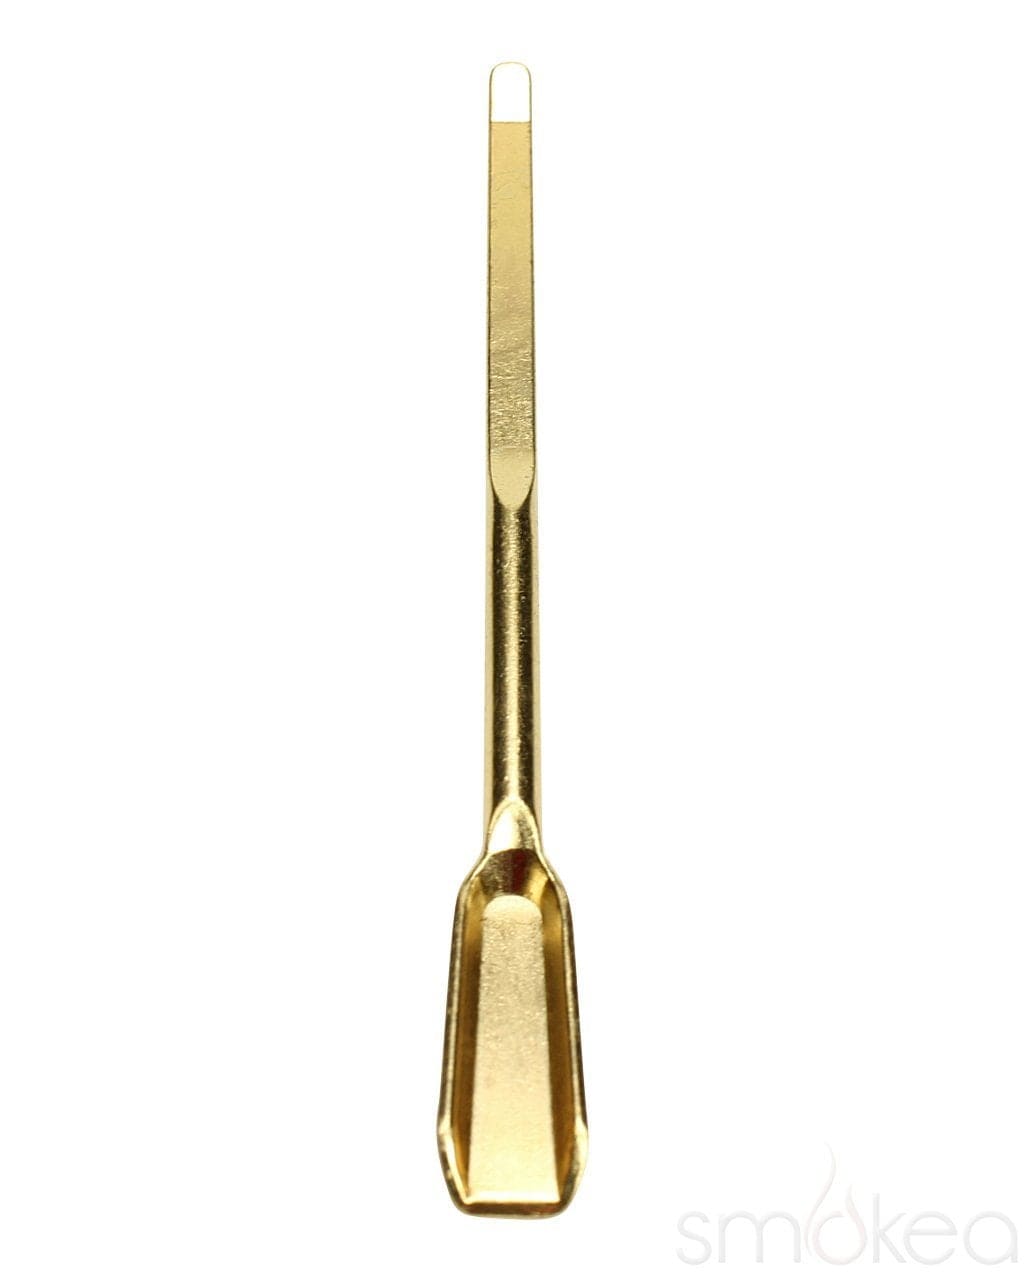 Gold Stainless Dabber Concentrate Spoon Scoop Wax DAB Tool - China